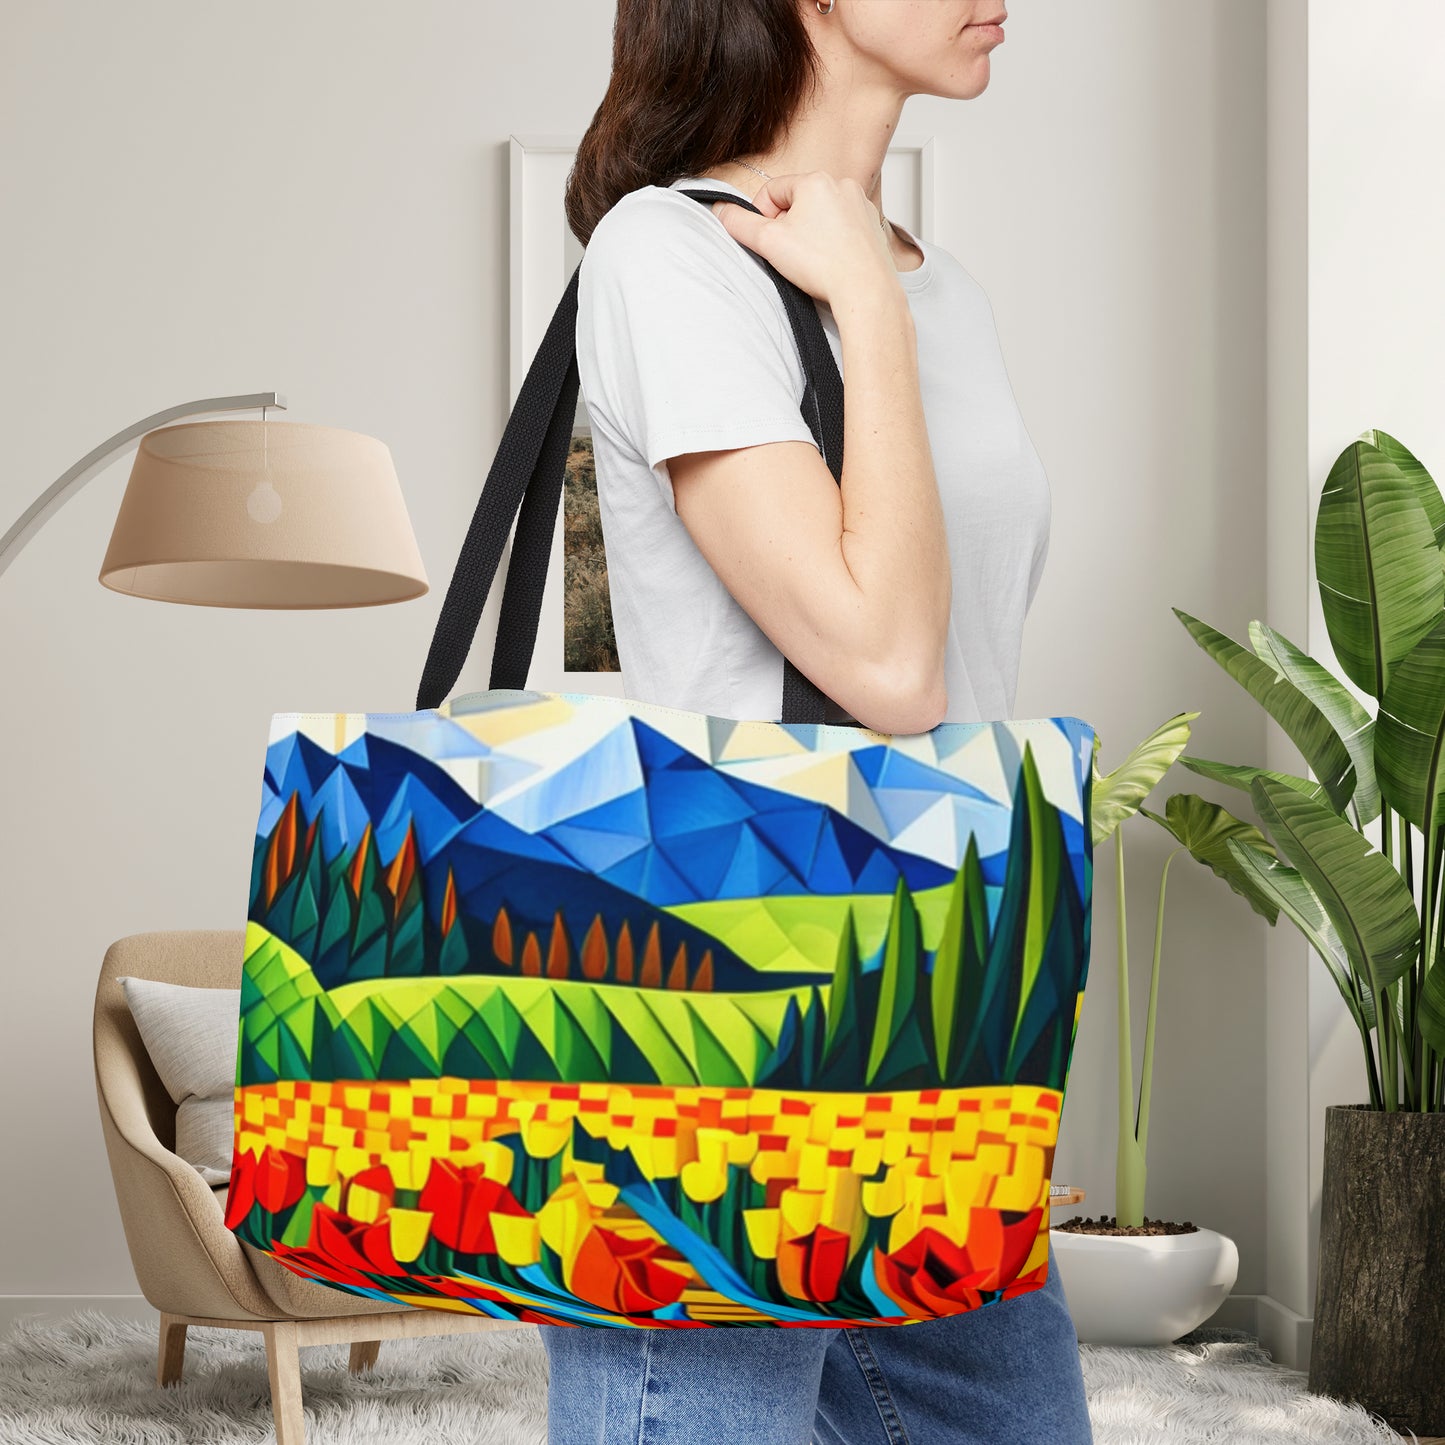 Dutch landscape in origami style inspired scenery on this beautiful Weekender Tote Bag.